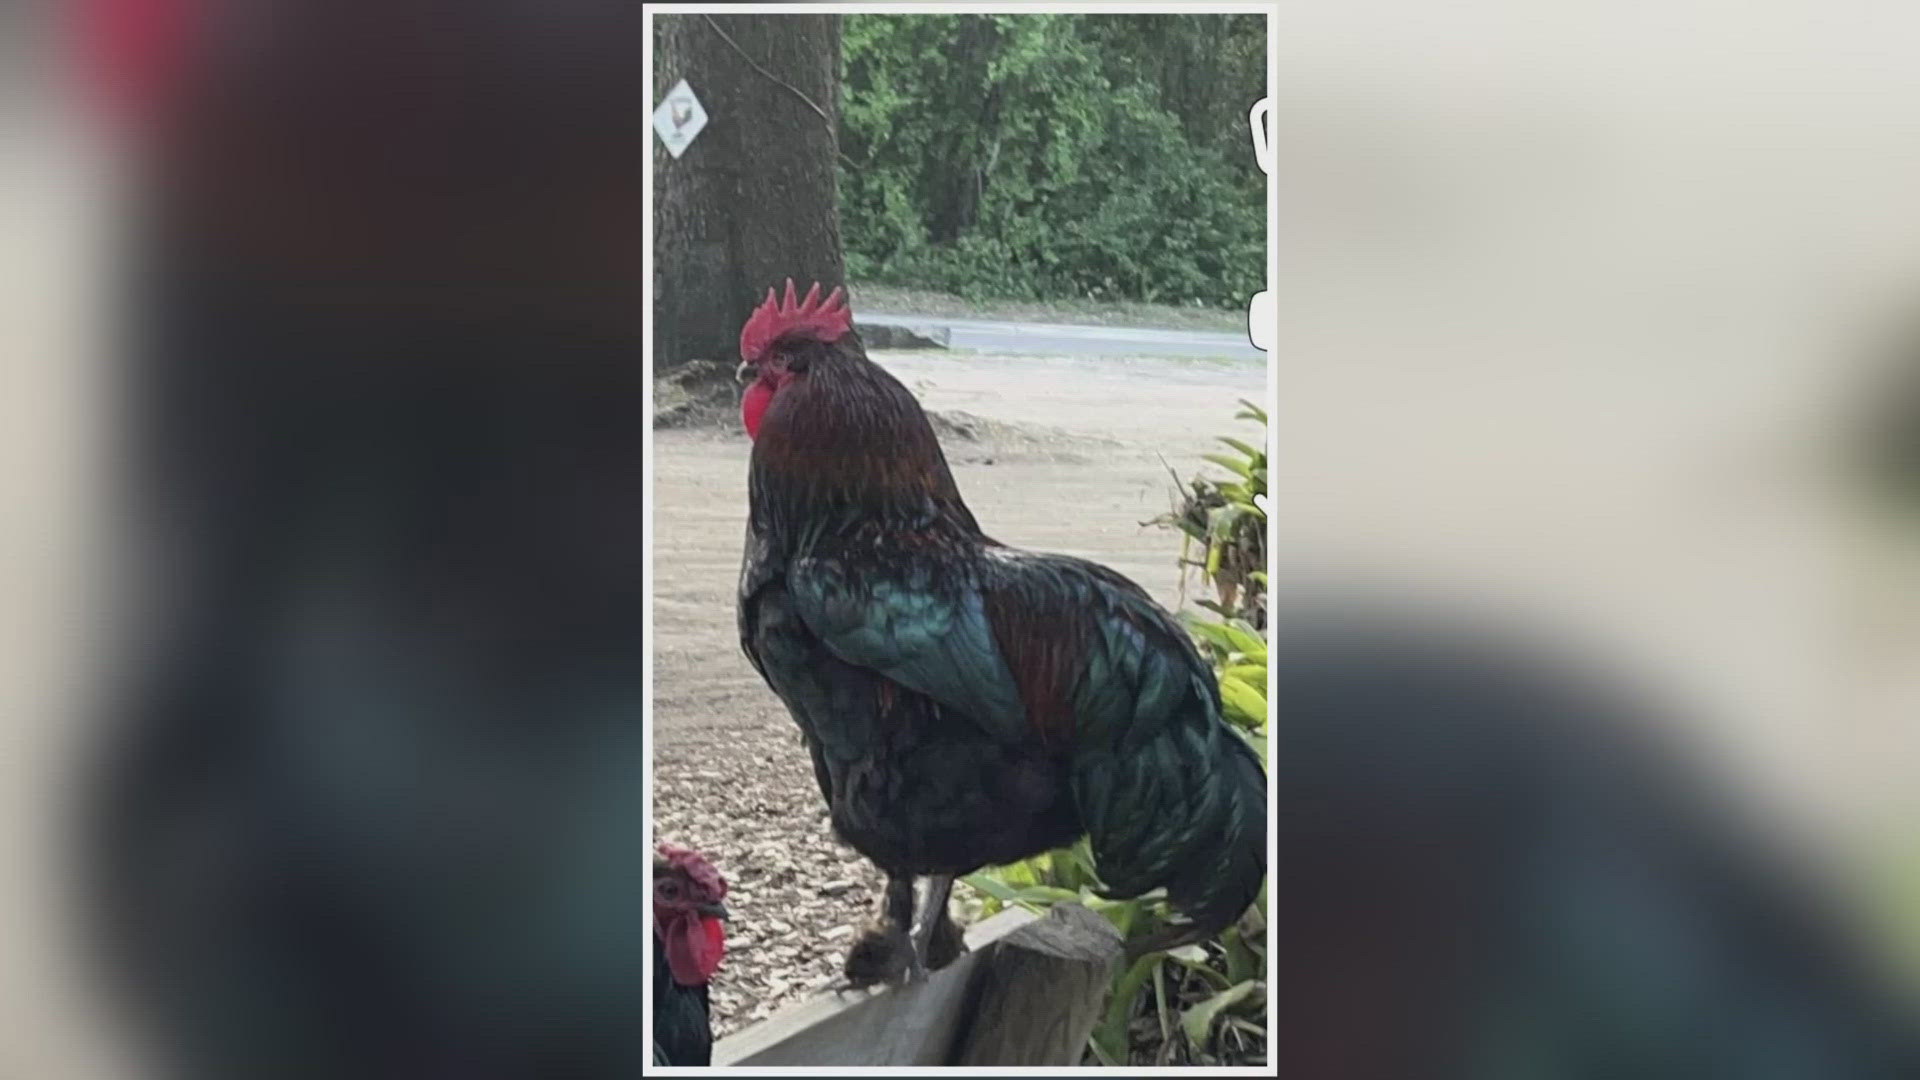 Woodpeckers Backyard BBQ says its rooster named "Tip Toe" has gone missing, as the restaurant is offering a reward for its return.